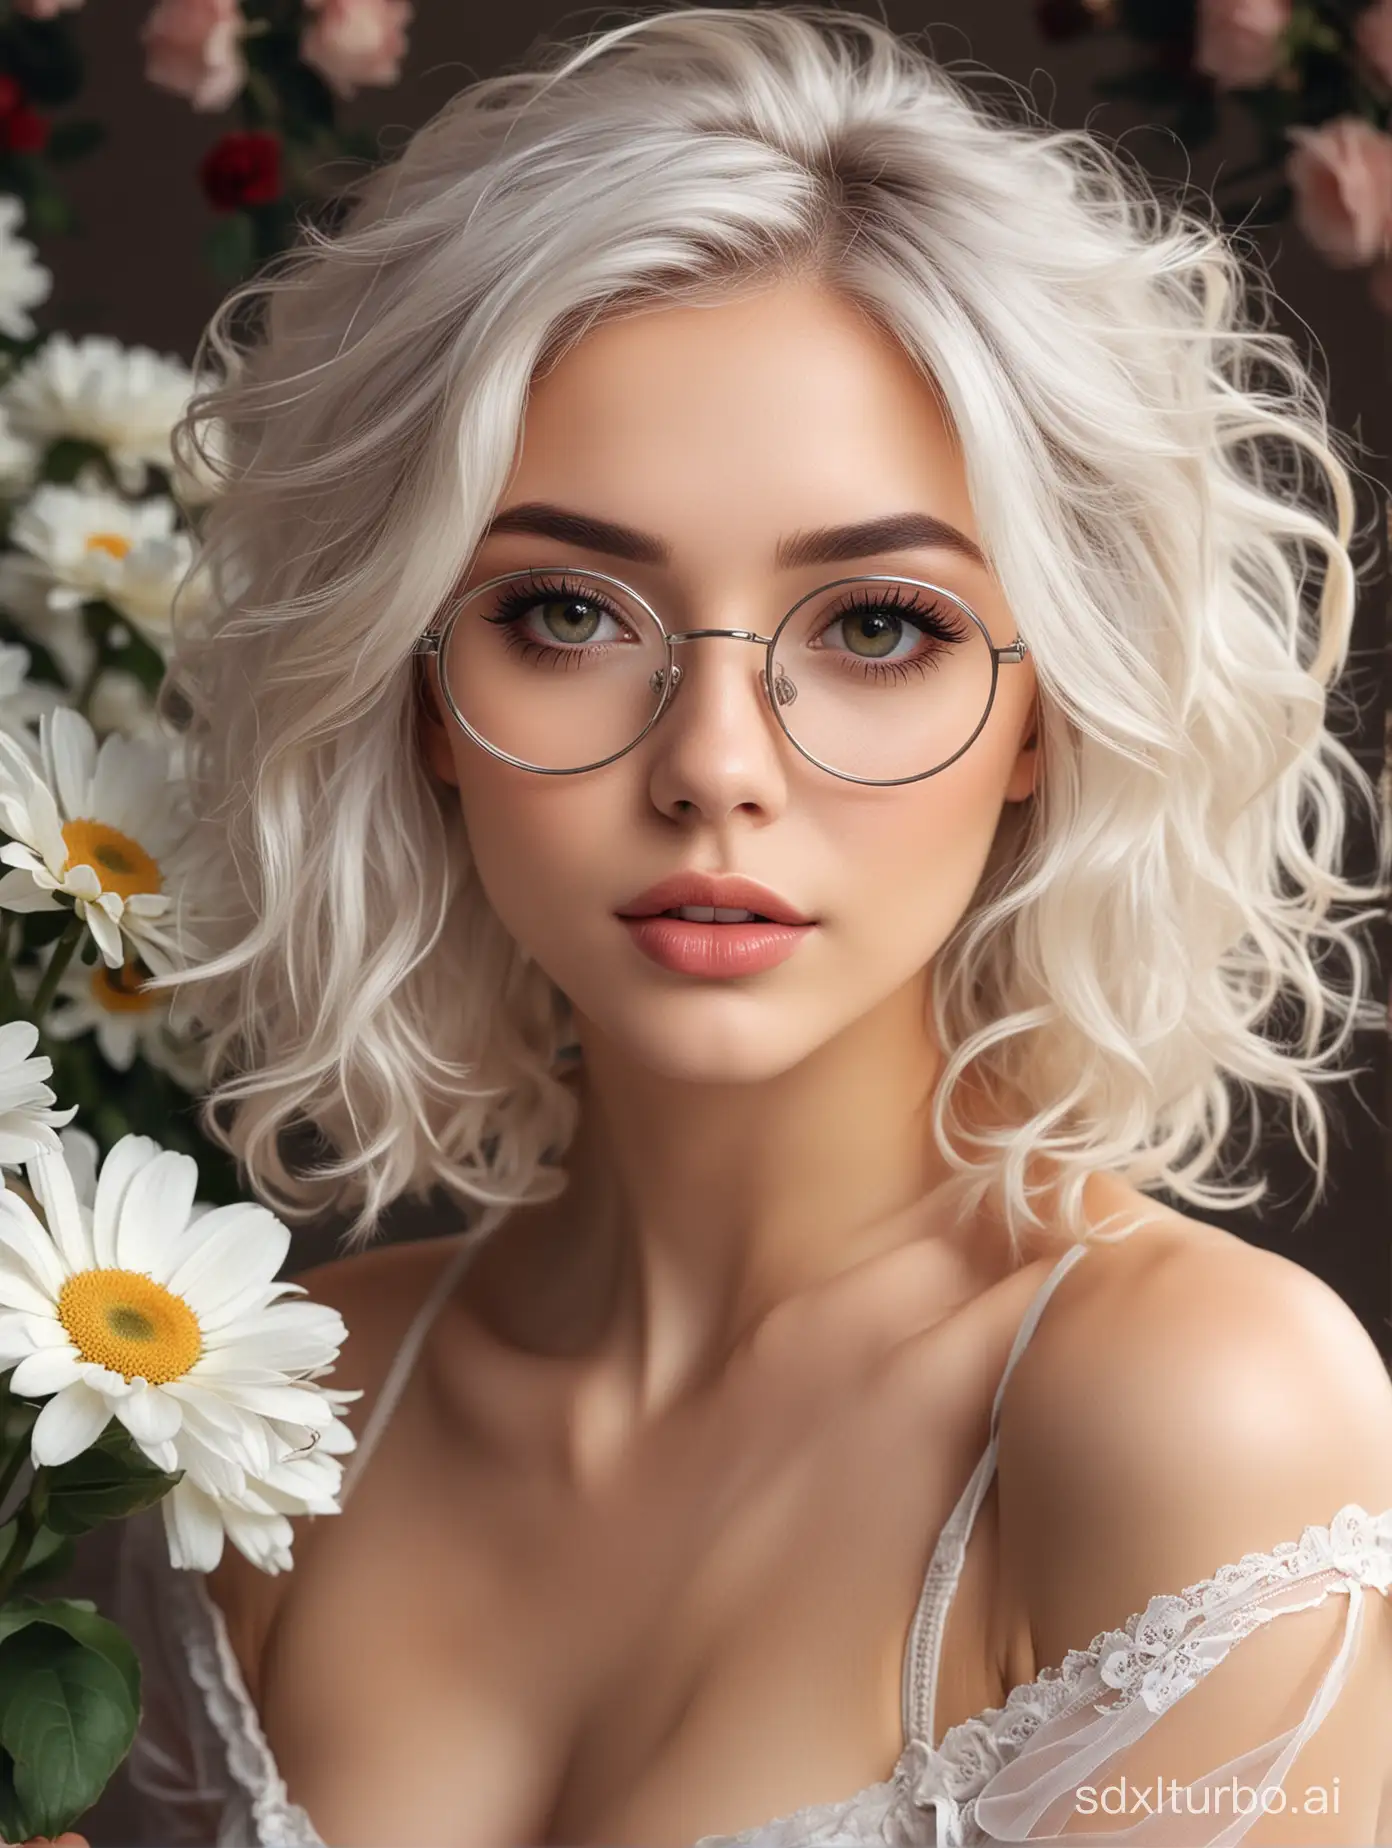 Seductive-Nude-Woman-with-White-Hair-and-Circular-Eyeglasses-in-Alluring-Pose